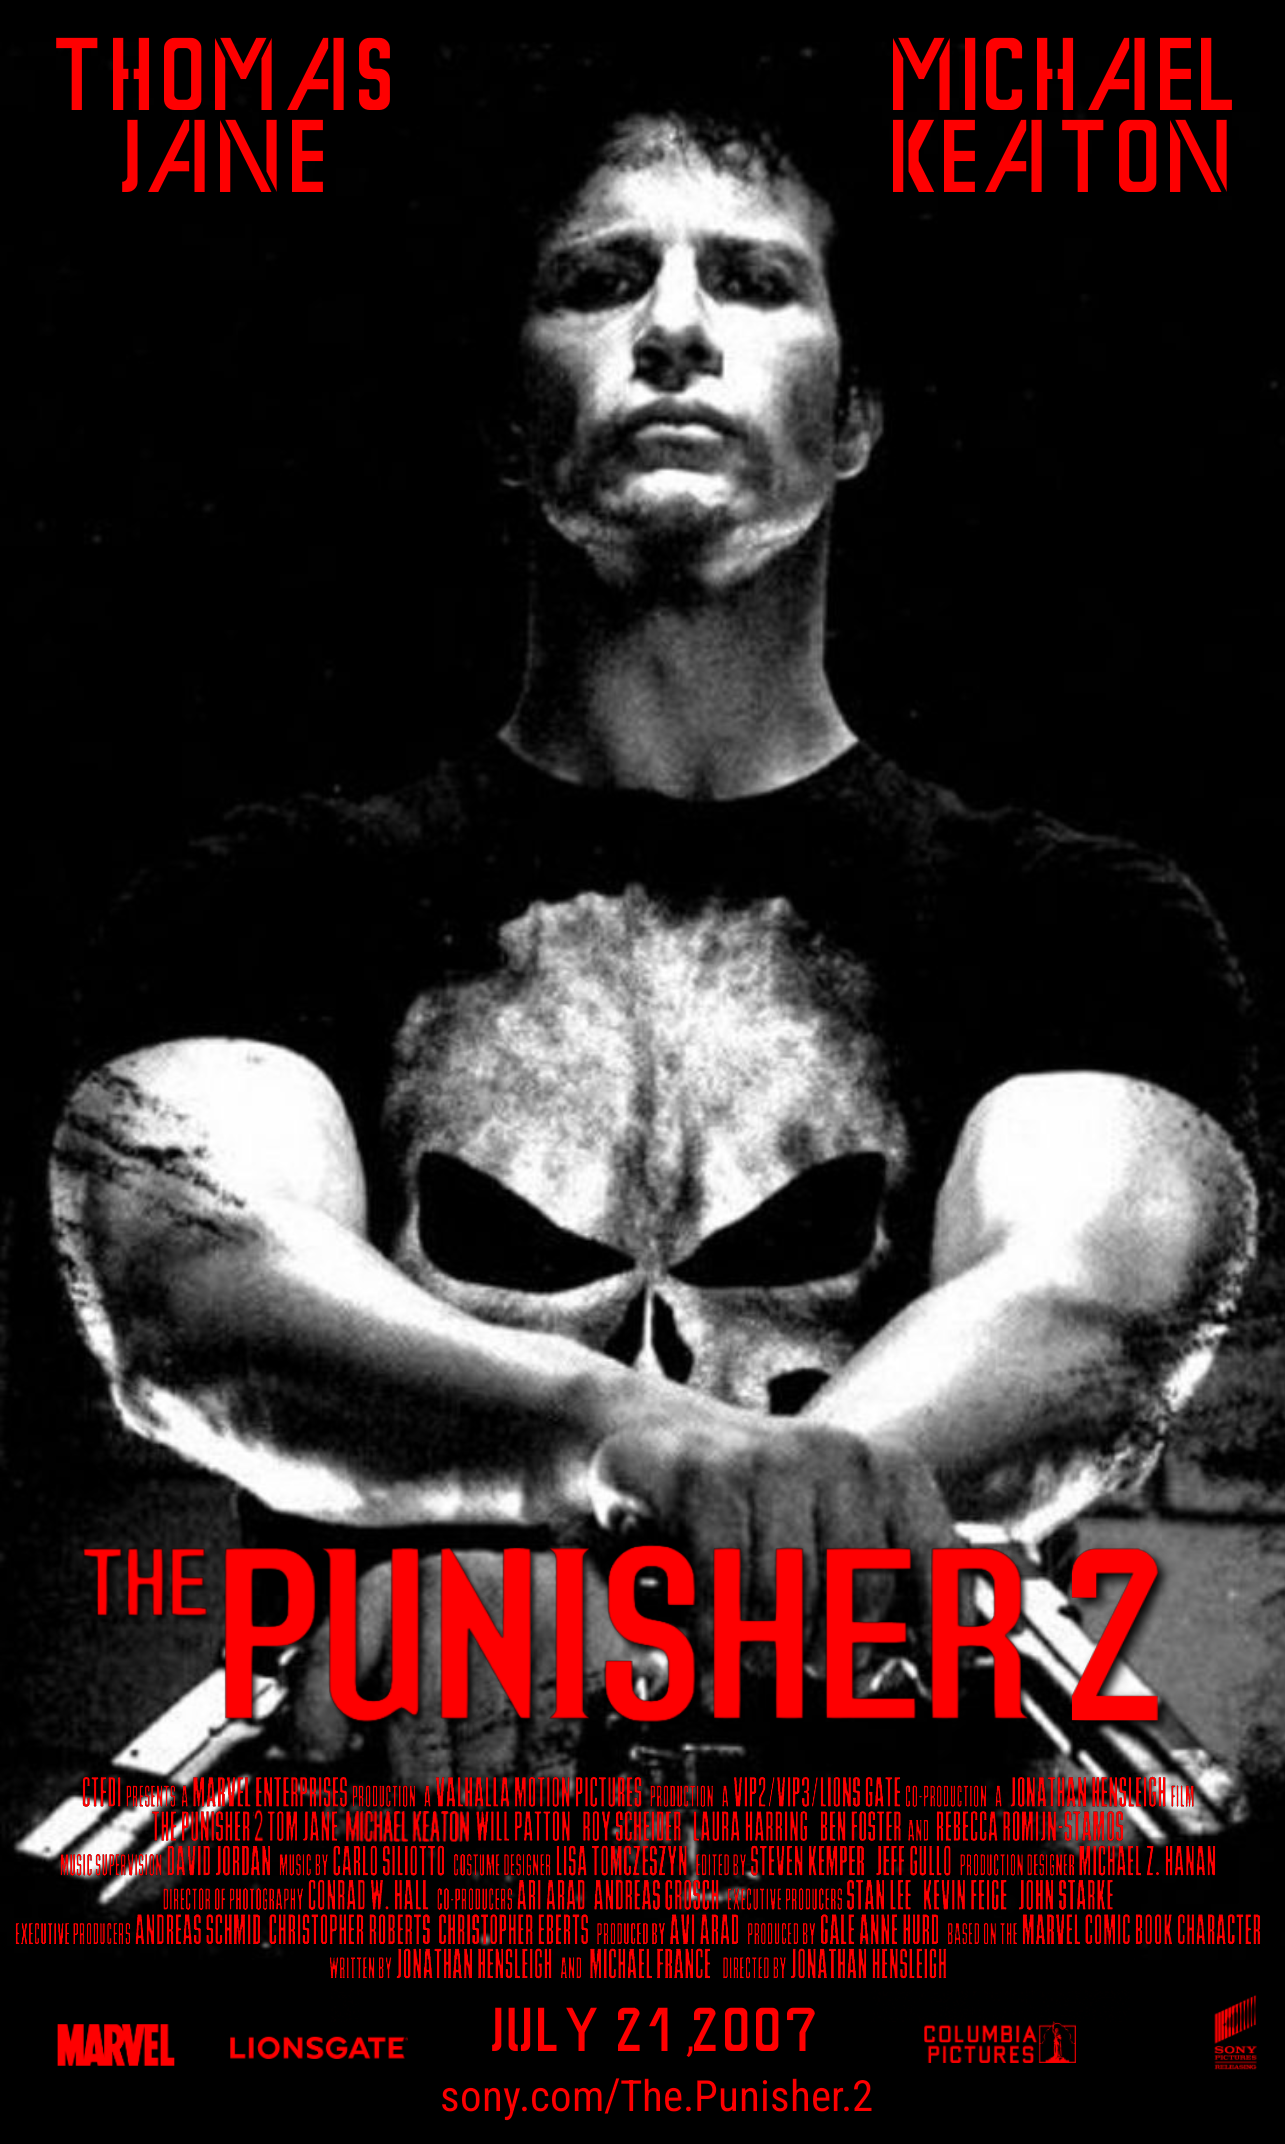 THE PUNISHER ps2 disk by shinkoheo on DeviantArt